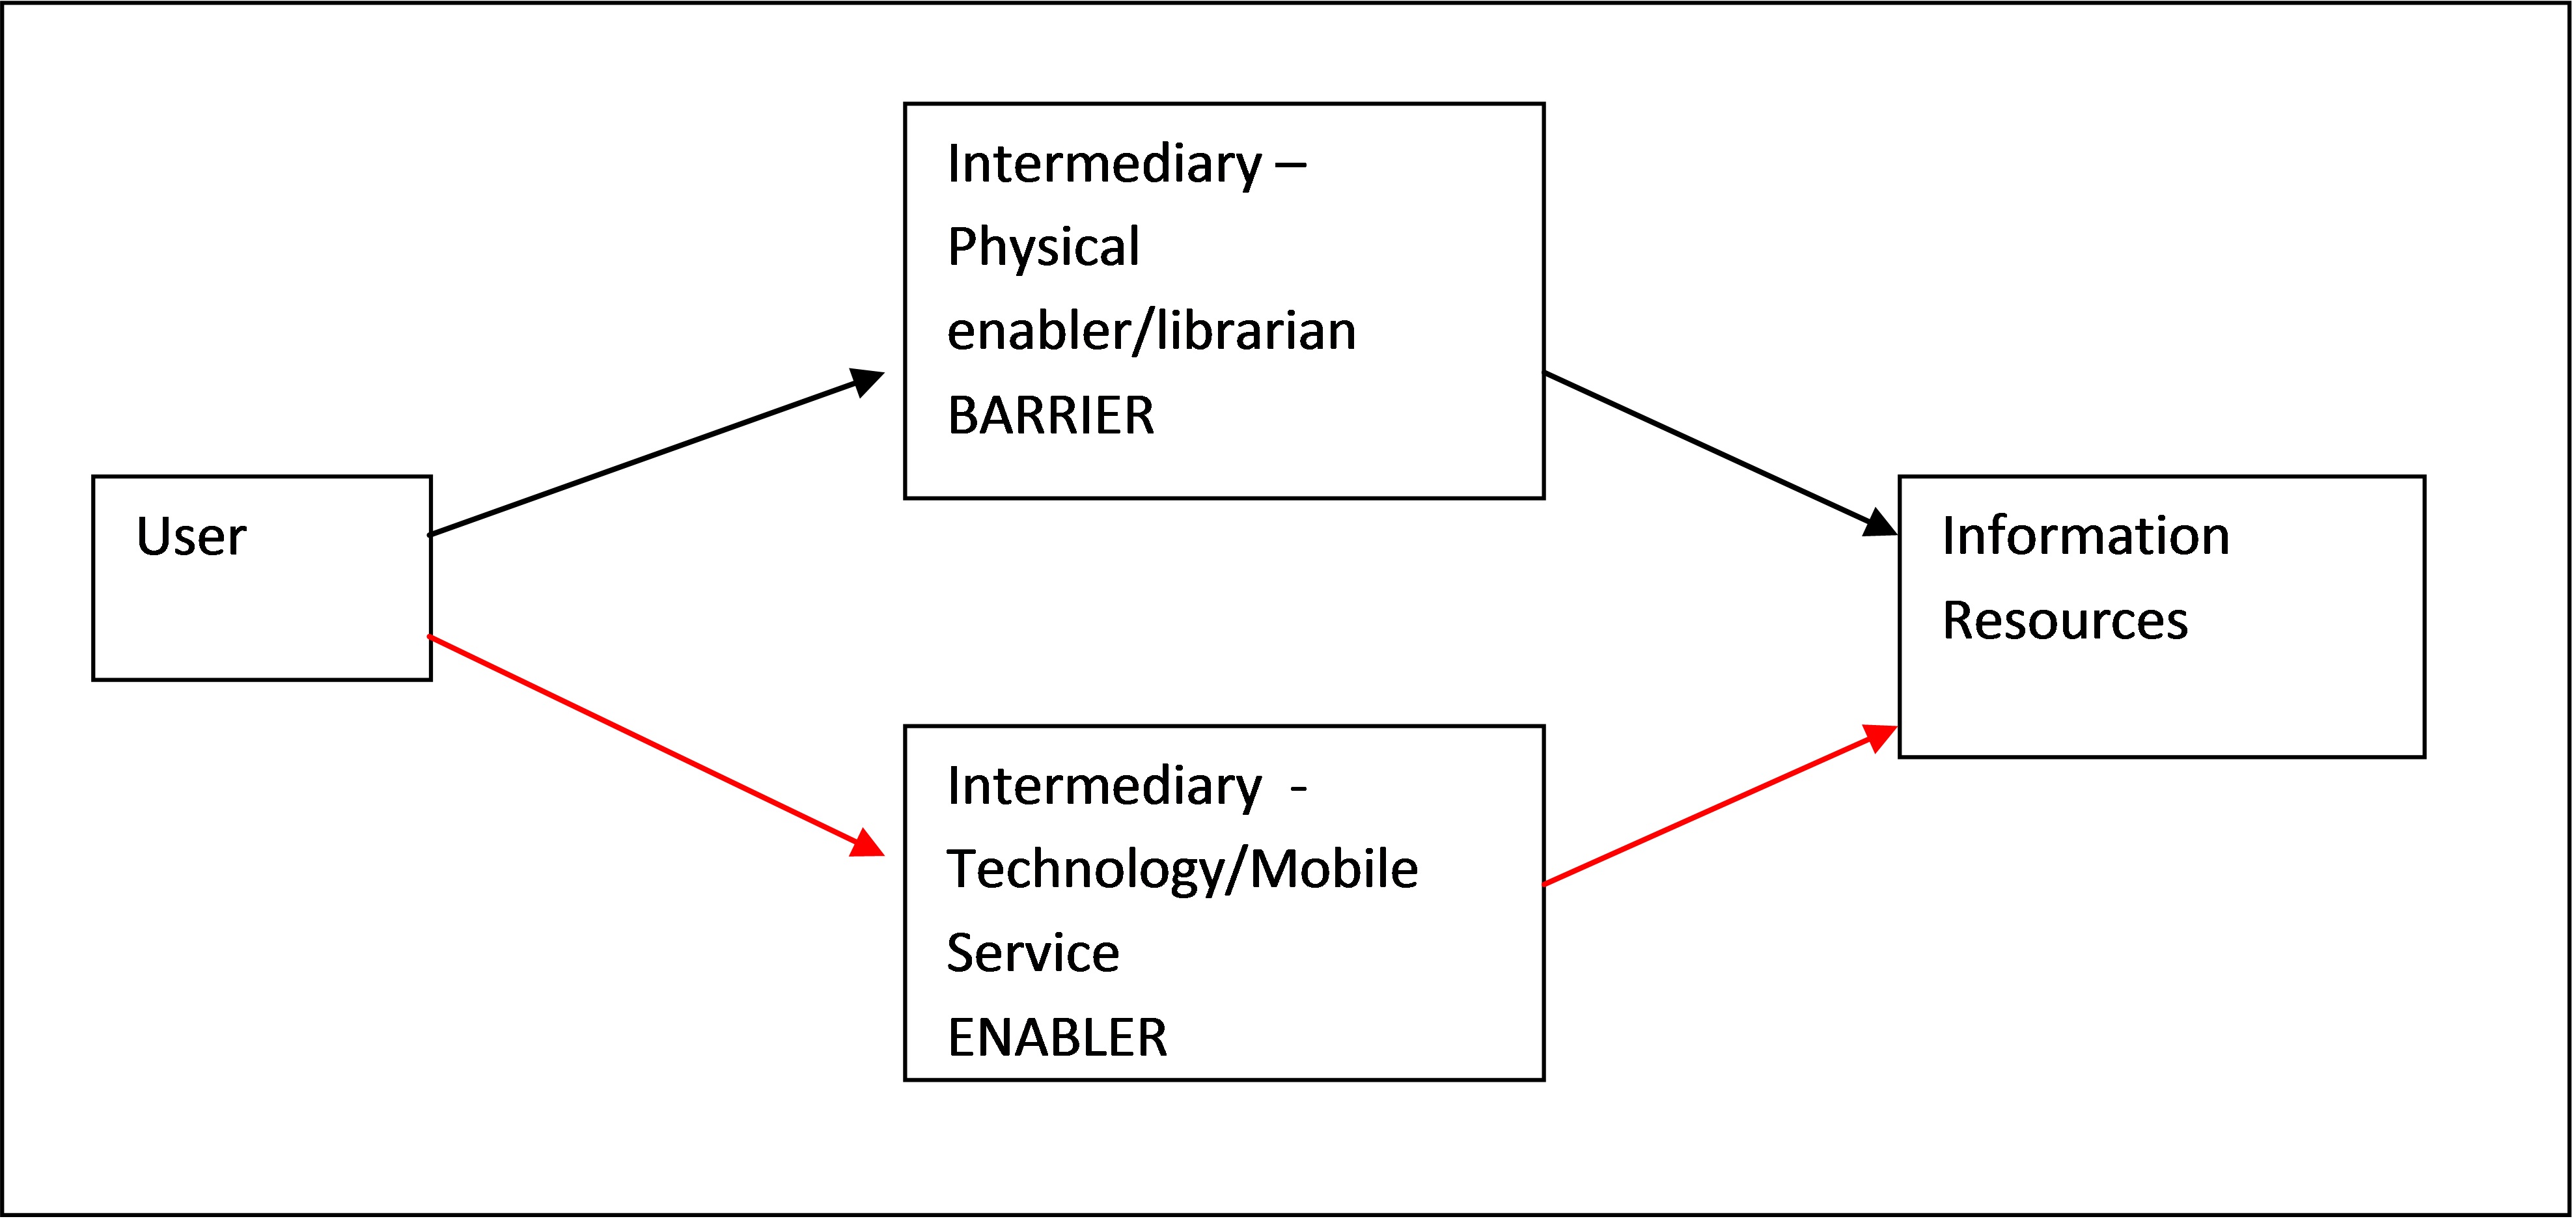 Figure 6:  The role of the Intermediary in allowing the user to access information resources (adapted from Wilson’s model)